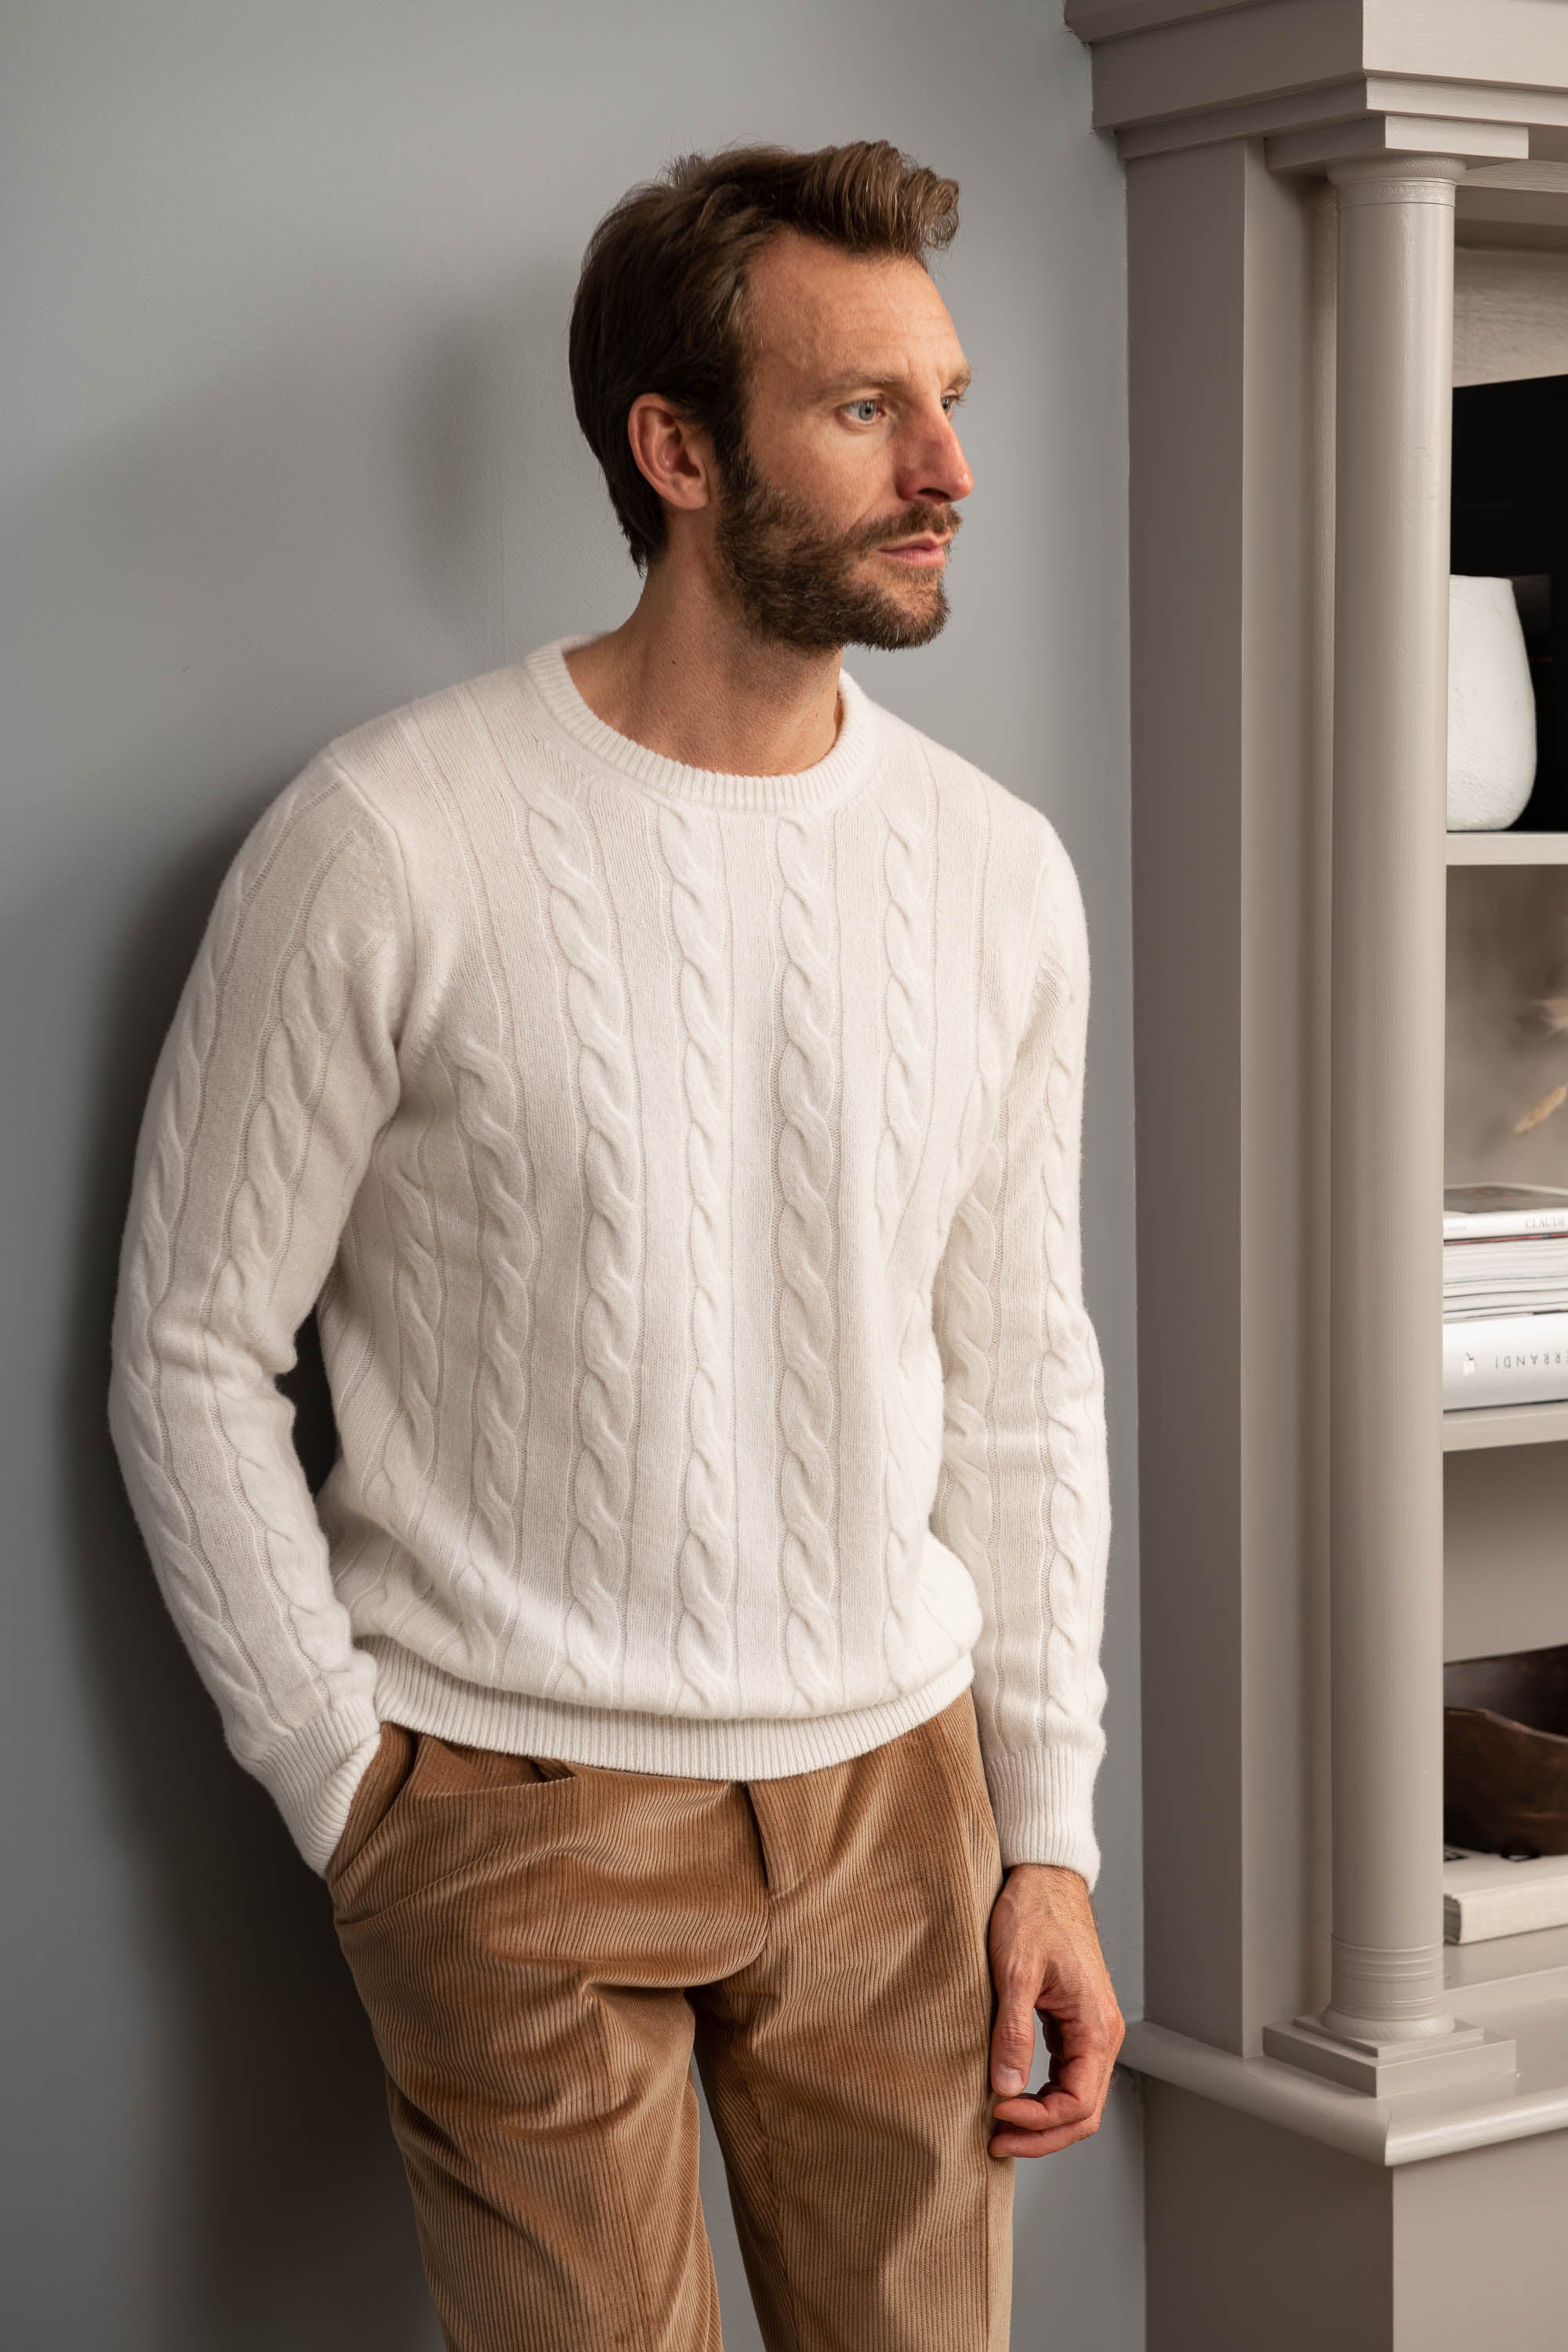 White sweater – Made in italy Pini Parma